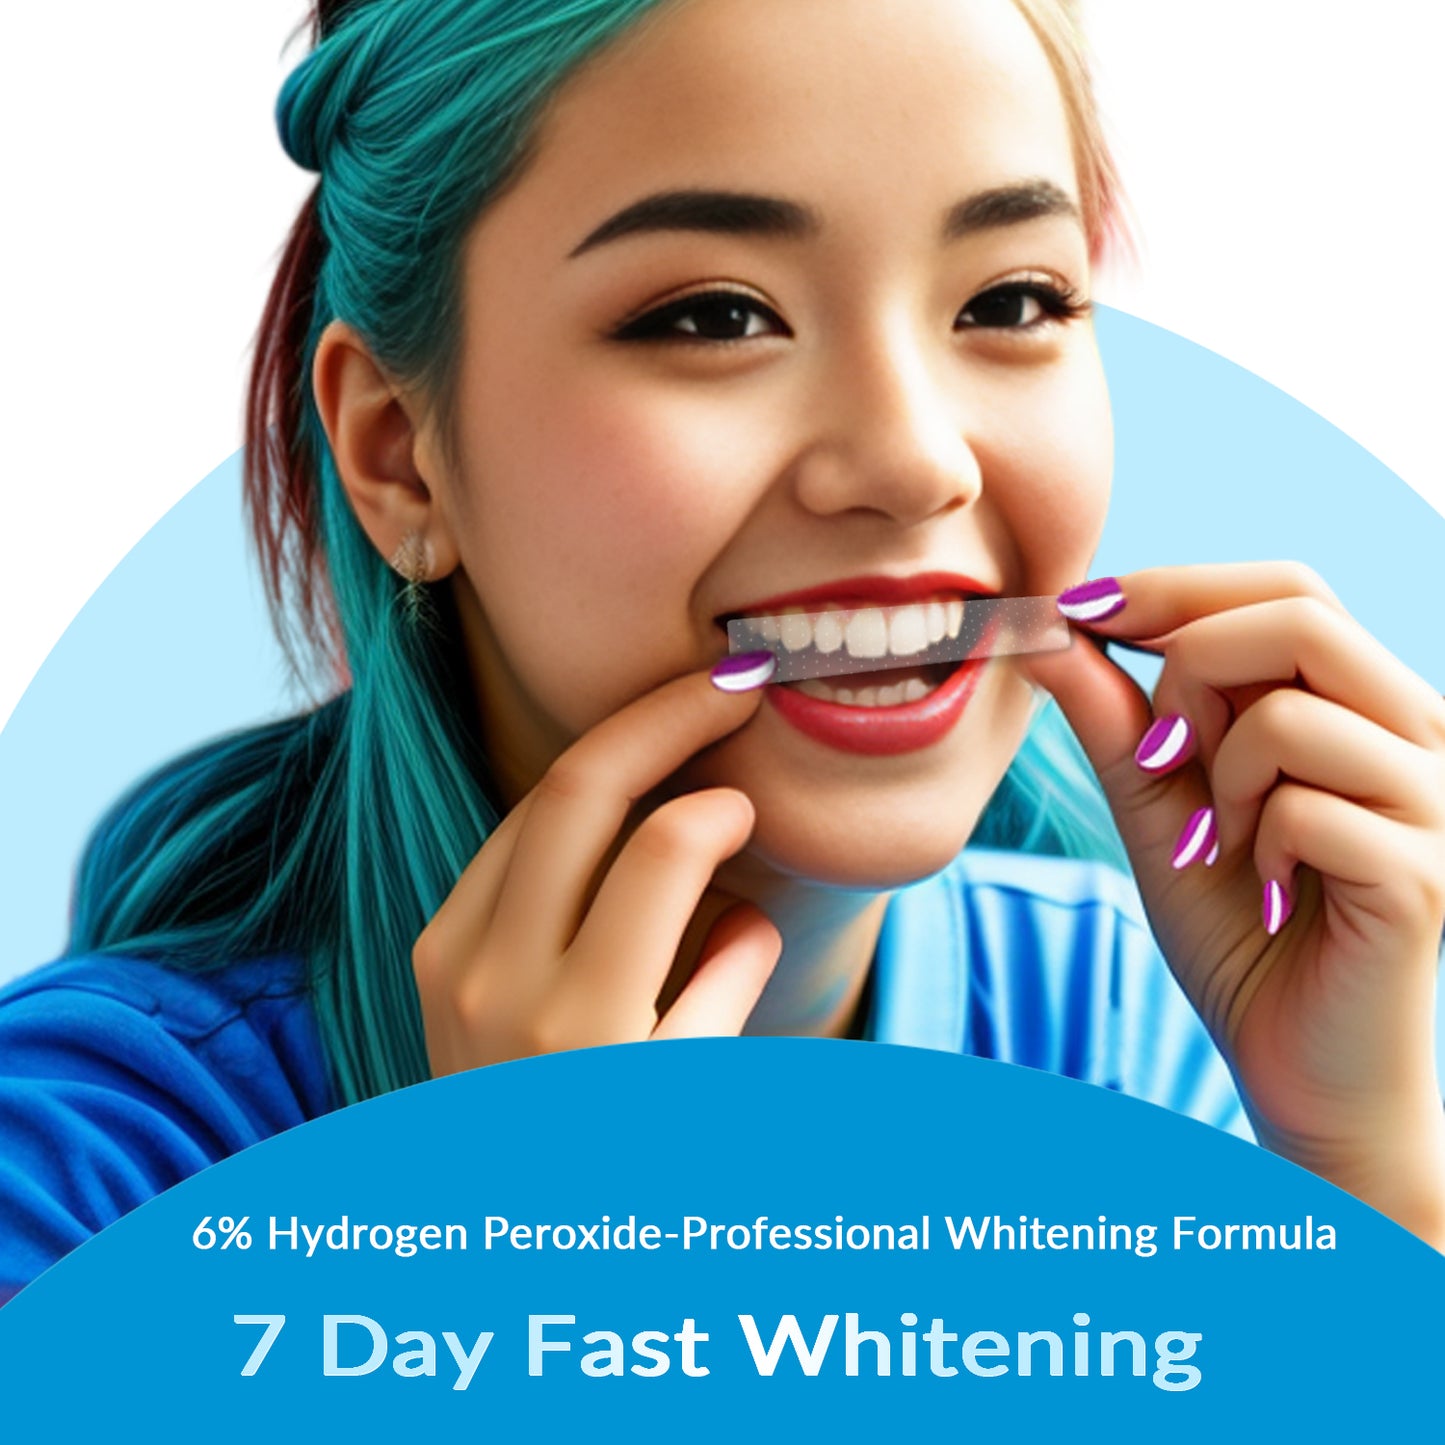 RABBiTOOTH Teeth Whitening Strips, 6% Hydrogen Peroxide, 7 Day Fast Whitening, 14 Treatments with 28 Strips